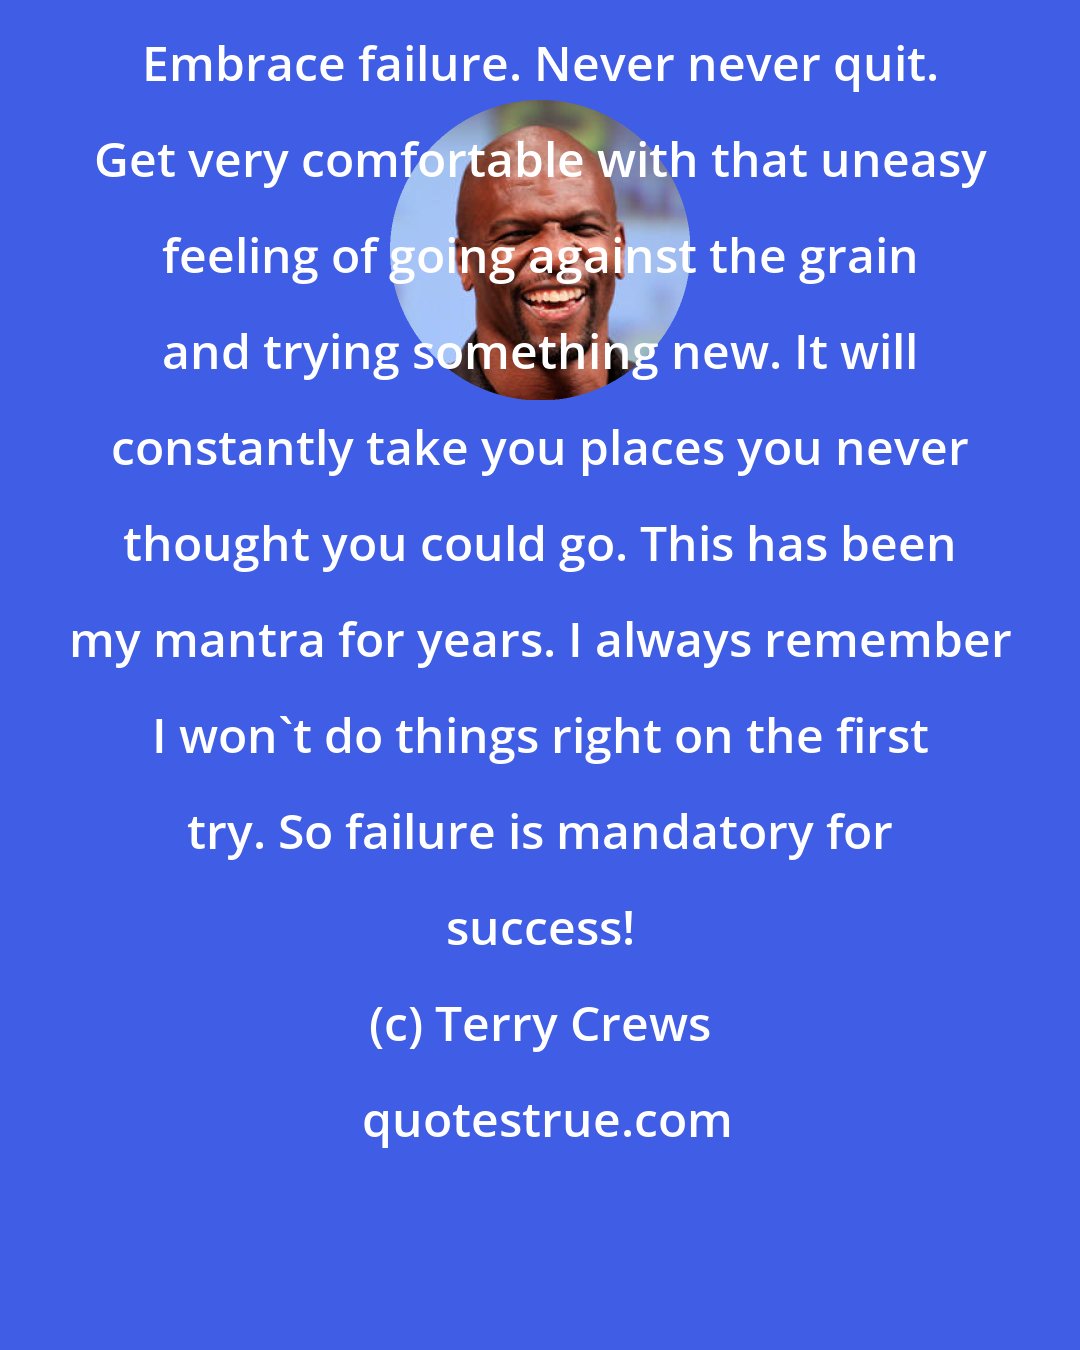 Terry Crews: Embrace failure. Never never quit. Get very comfortable with that uneasy feeling of going against the grain and trying something new. It will constantly take you places you never thought you could go. This has been my mantra for years. I always remember I won't do things right on the first try. So failure is mandatory for success!